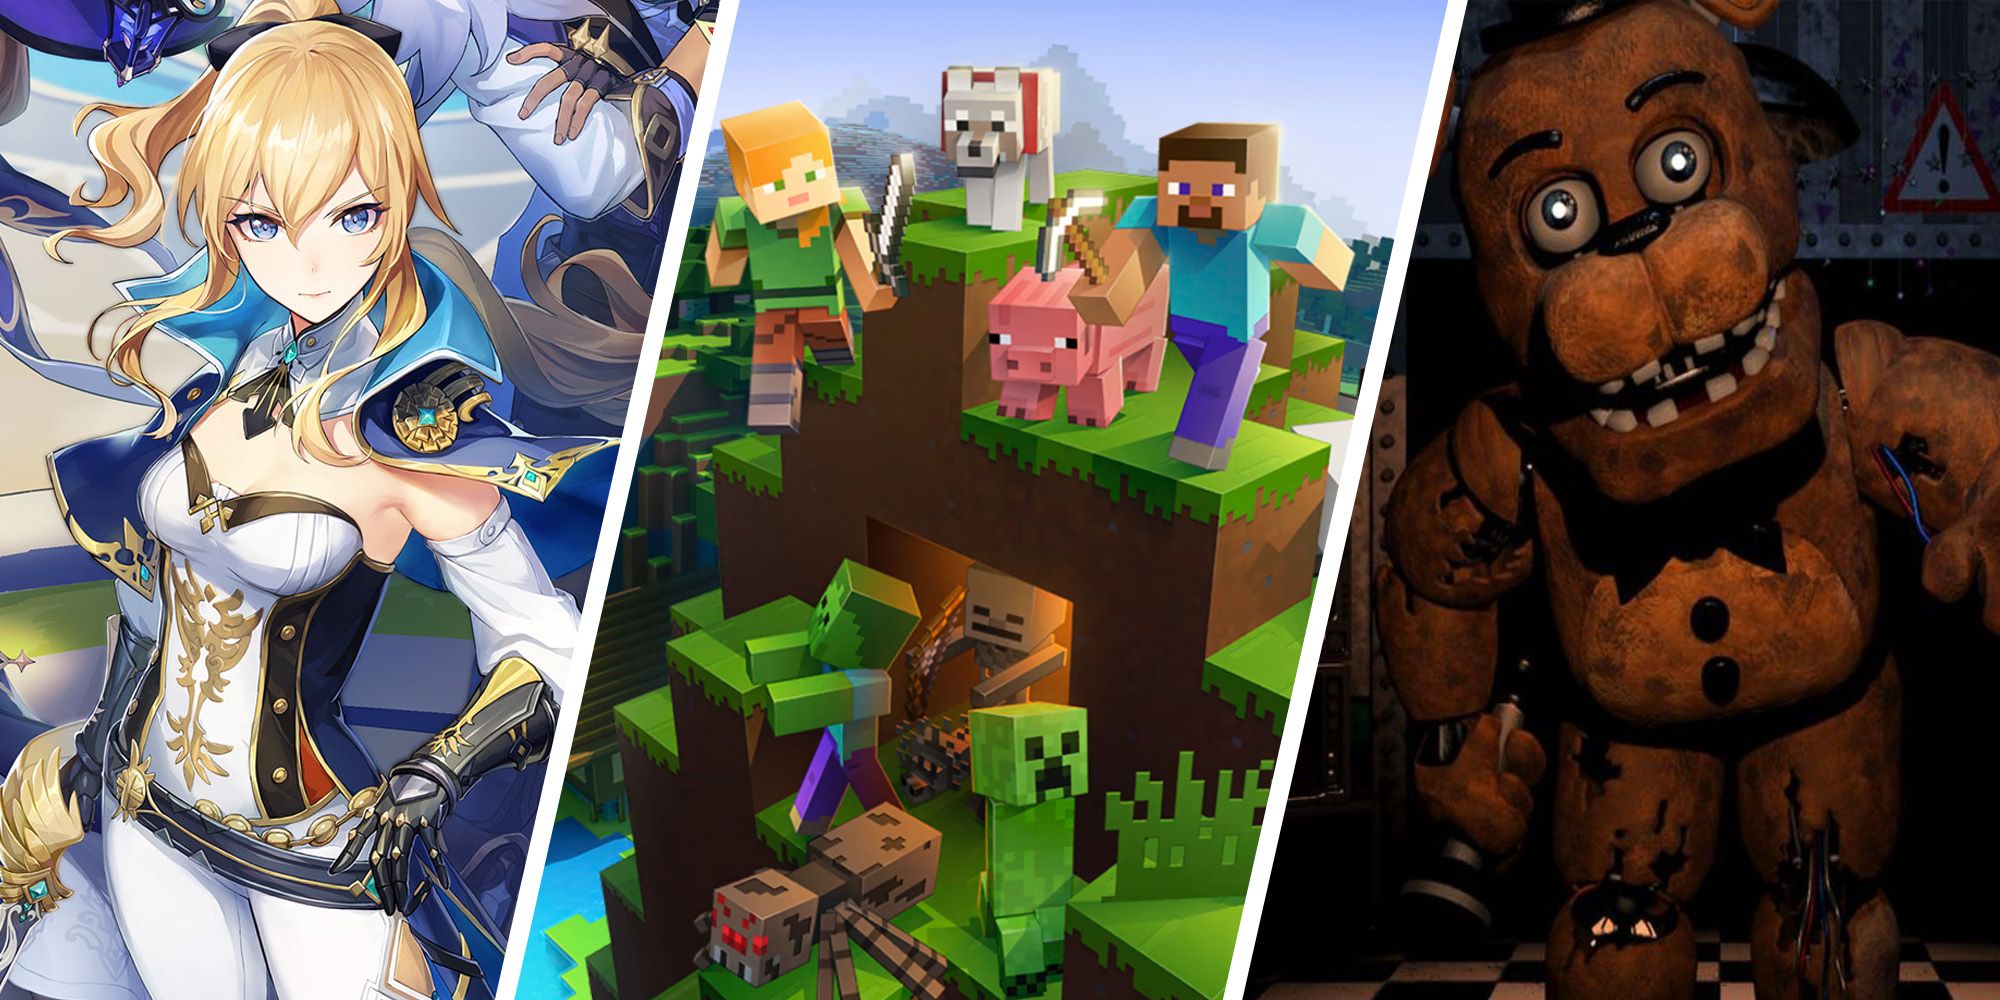 The Most Popular iPhone Games to Play Right Now